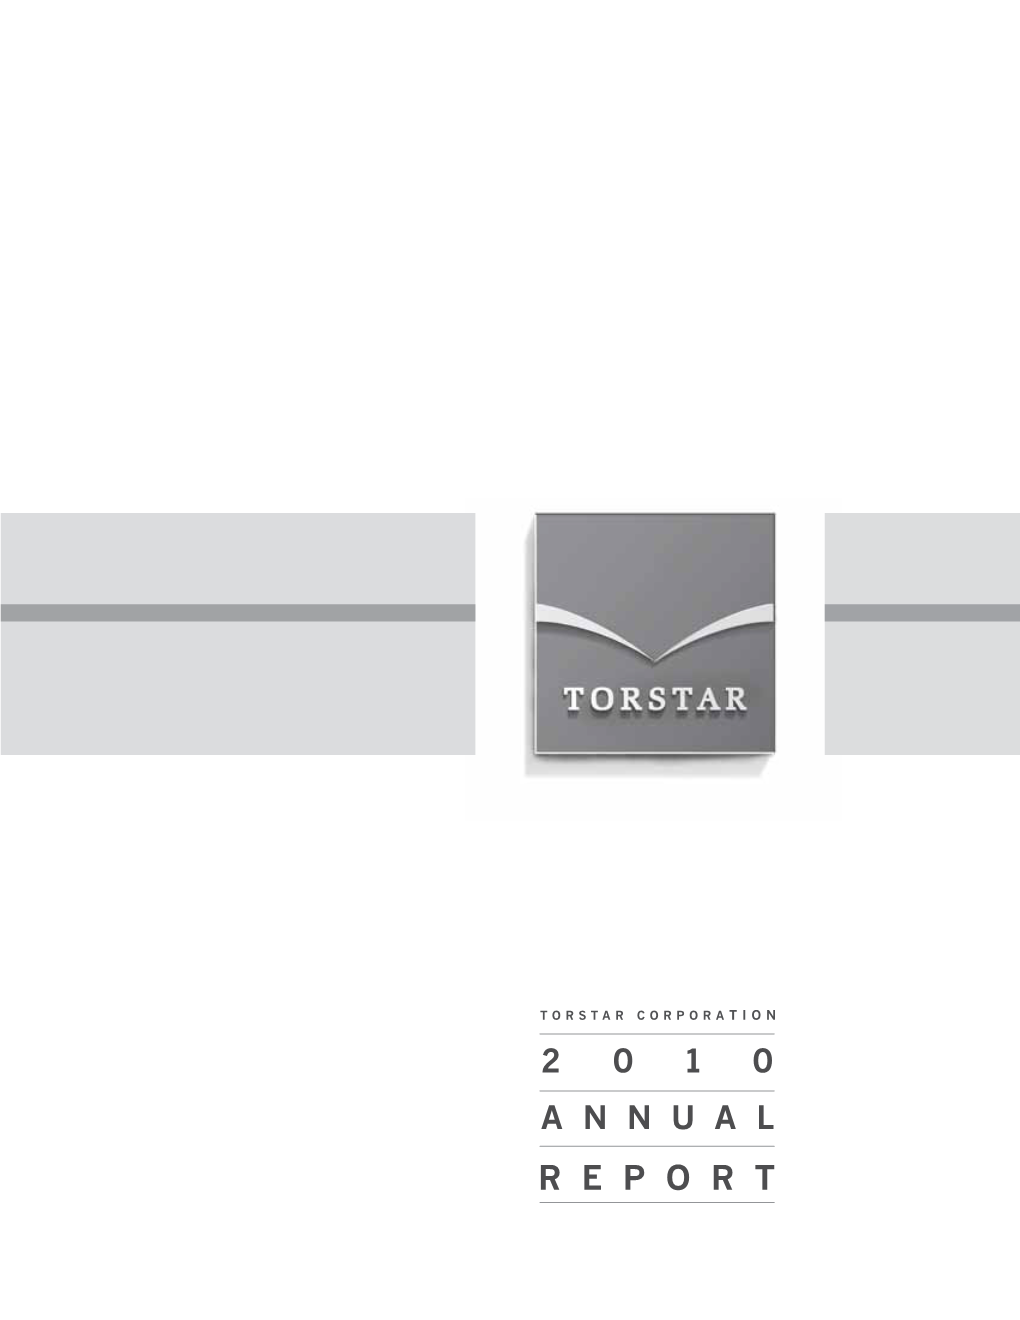 2010 Annual Report Torstar Corporation 2010 Annual Report Message from the Chair